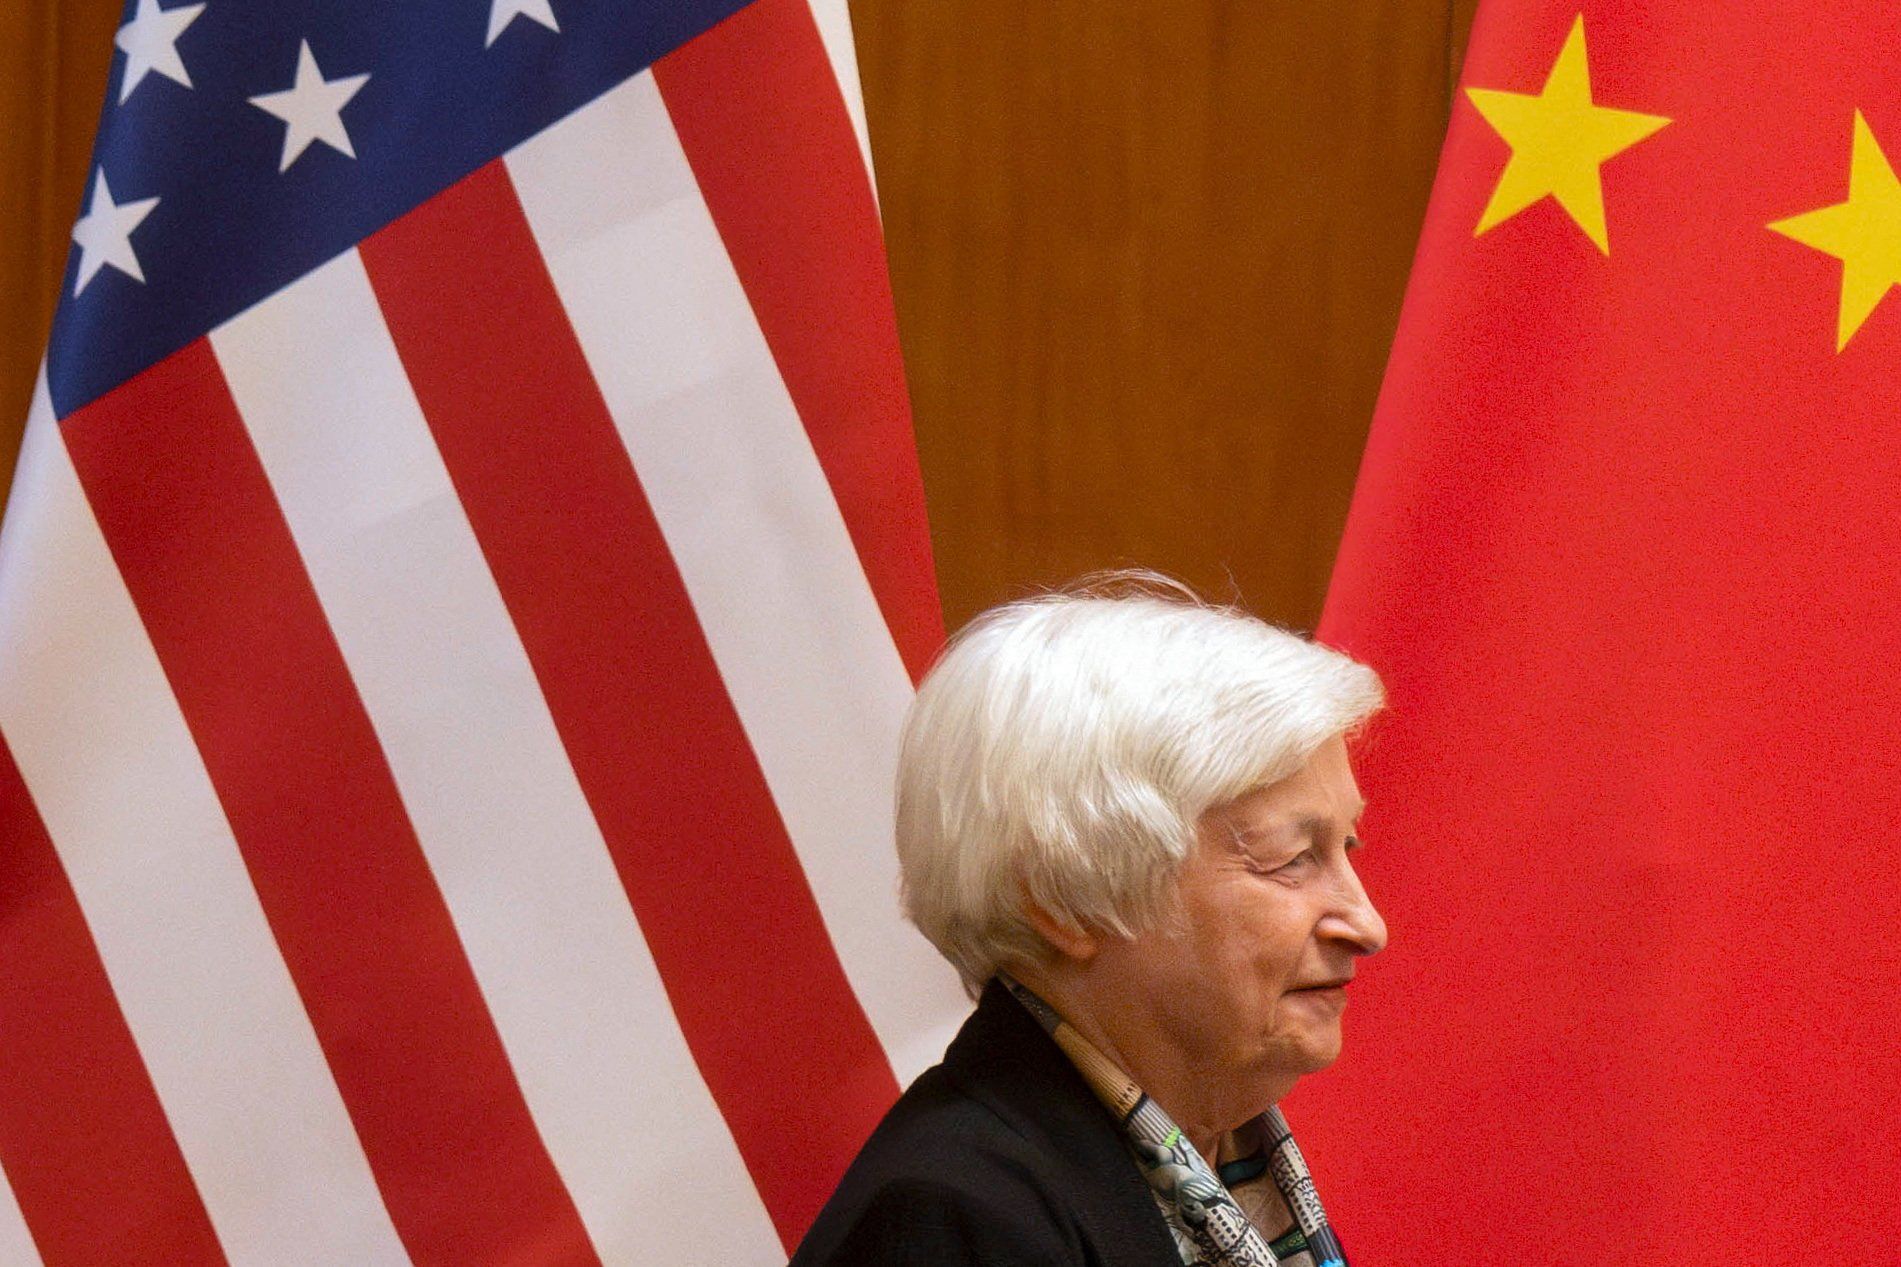 US Treasury Secretary Janet Yellen looks on during a meeting with Chinese Vice Premier He Lifeng at the Diaoyutai State Guesthouse in Beijing.